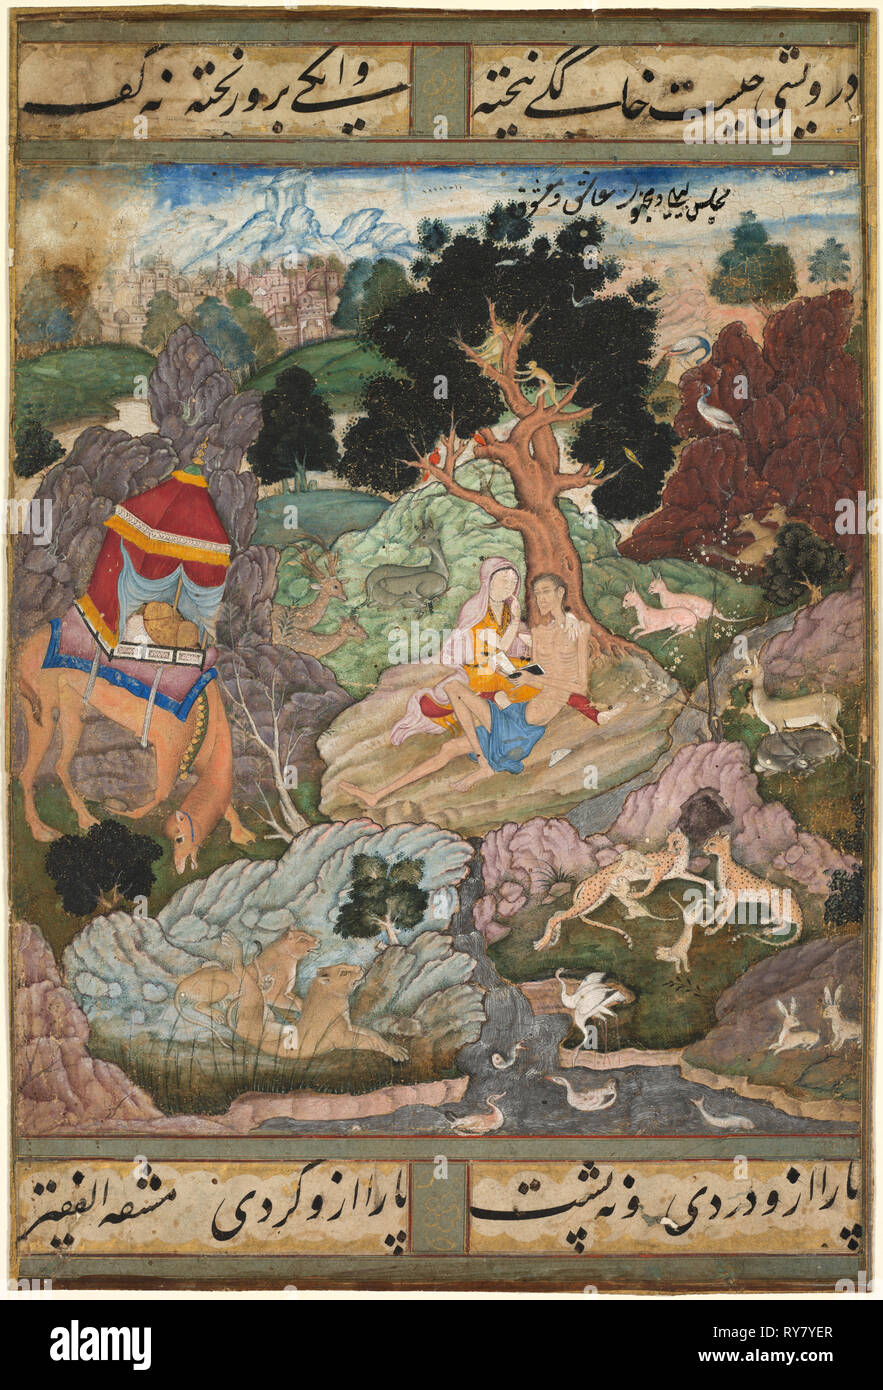 Layla and Majnun in the wilderness with animals, from a Khamsa (Quintet) of Amir Khusrau Dihlavi, c. 1590–1600. Attributed to Sanwalah (Indian, active c. 1580–1600). Opaque watercolor, ink and gold on paper; page: 24.9 x 16.8 cm (9 13/16 x 6 5/8 in.); painting: 18.6 x 16.2 cm (7 5/16 x 6 3/8 in Stock Photo